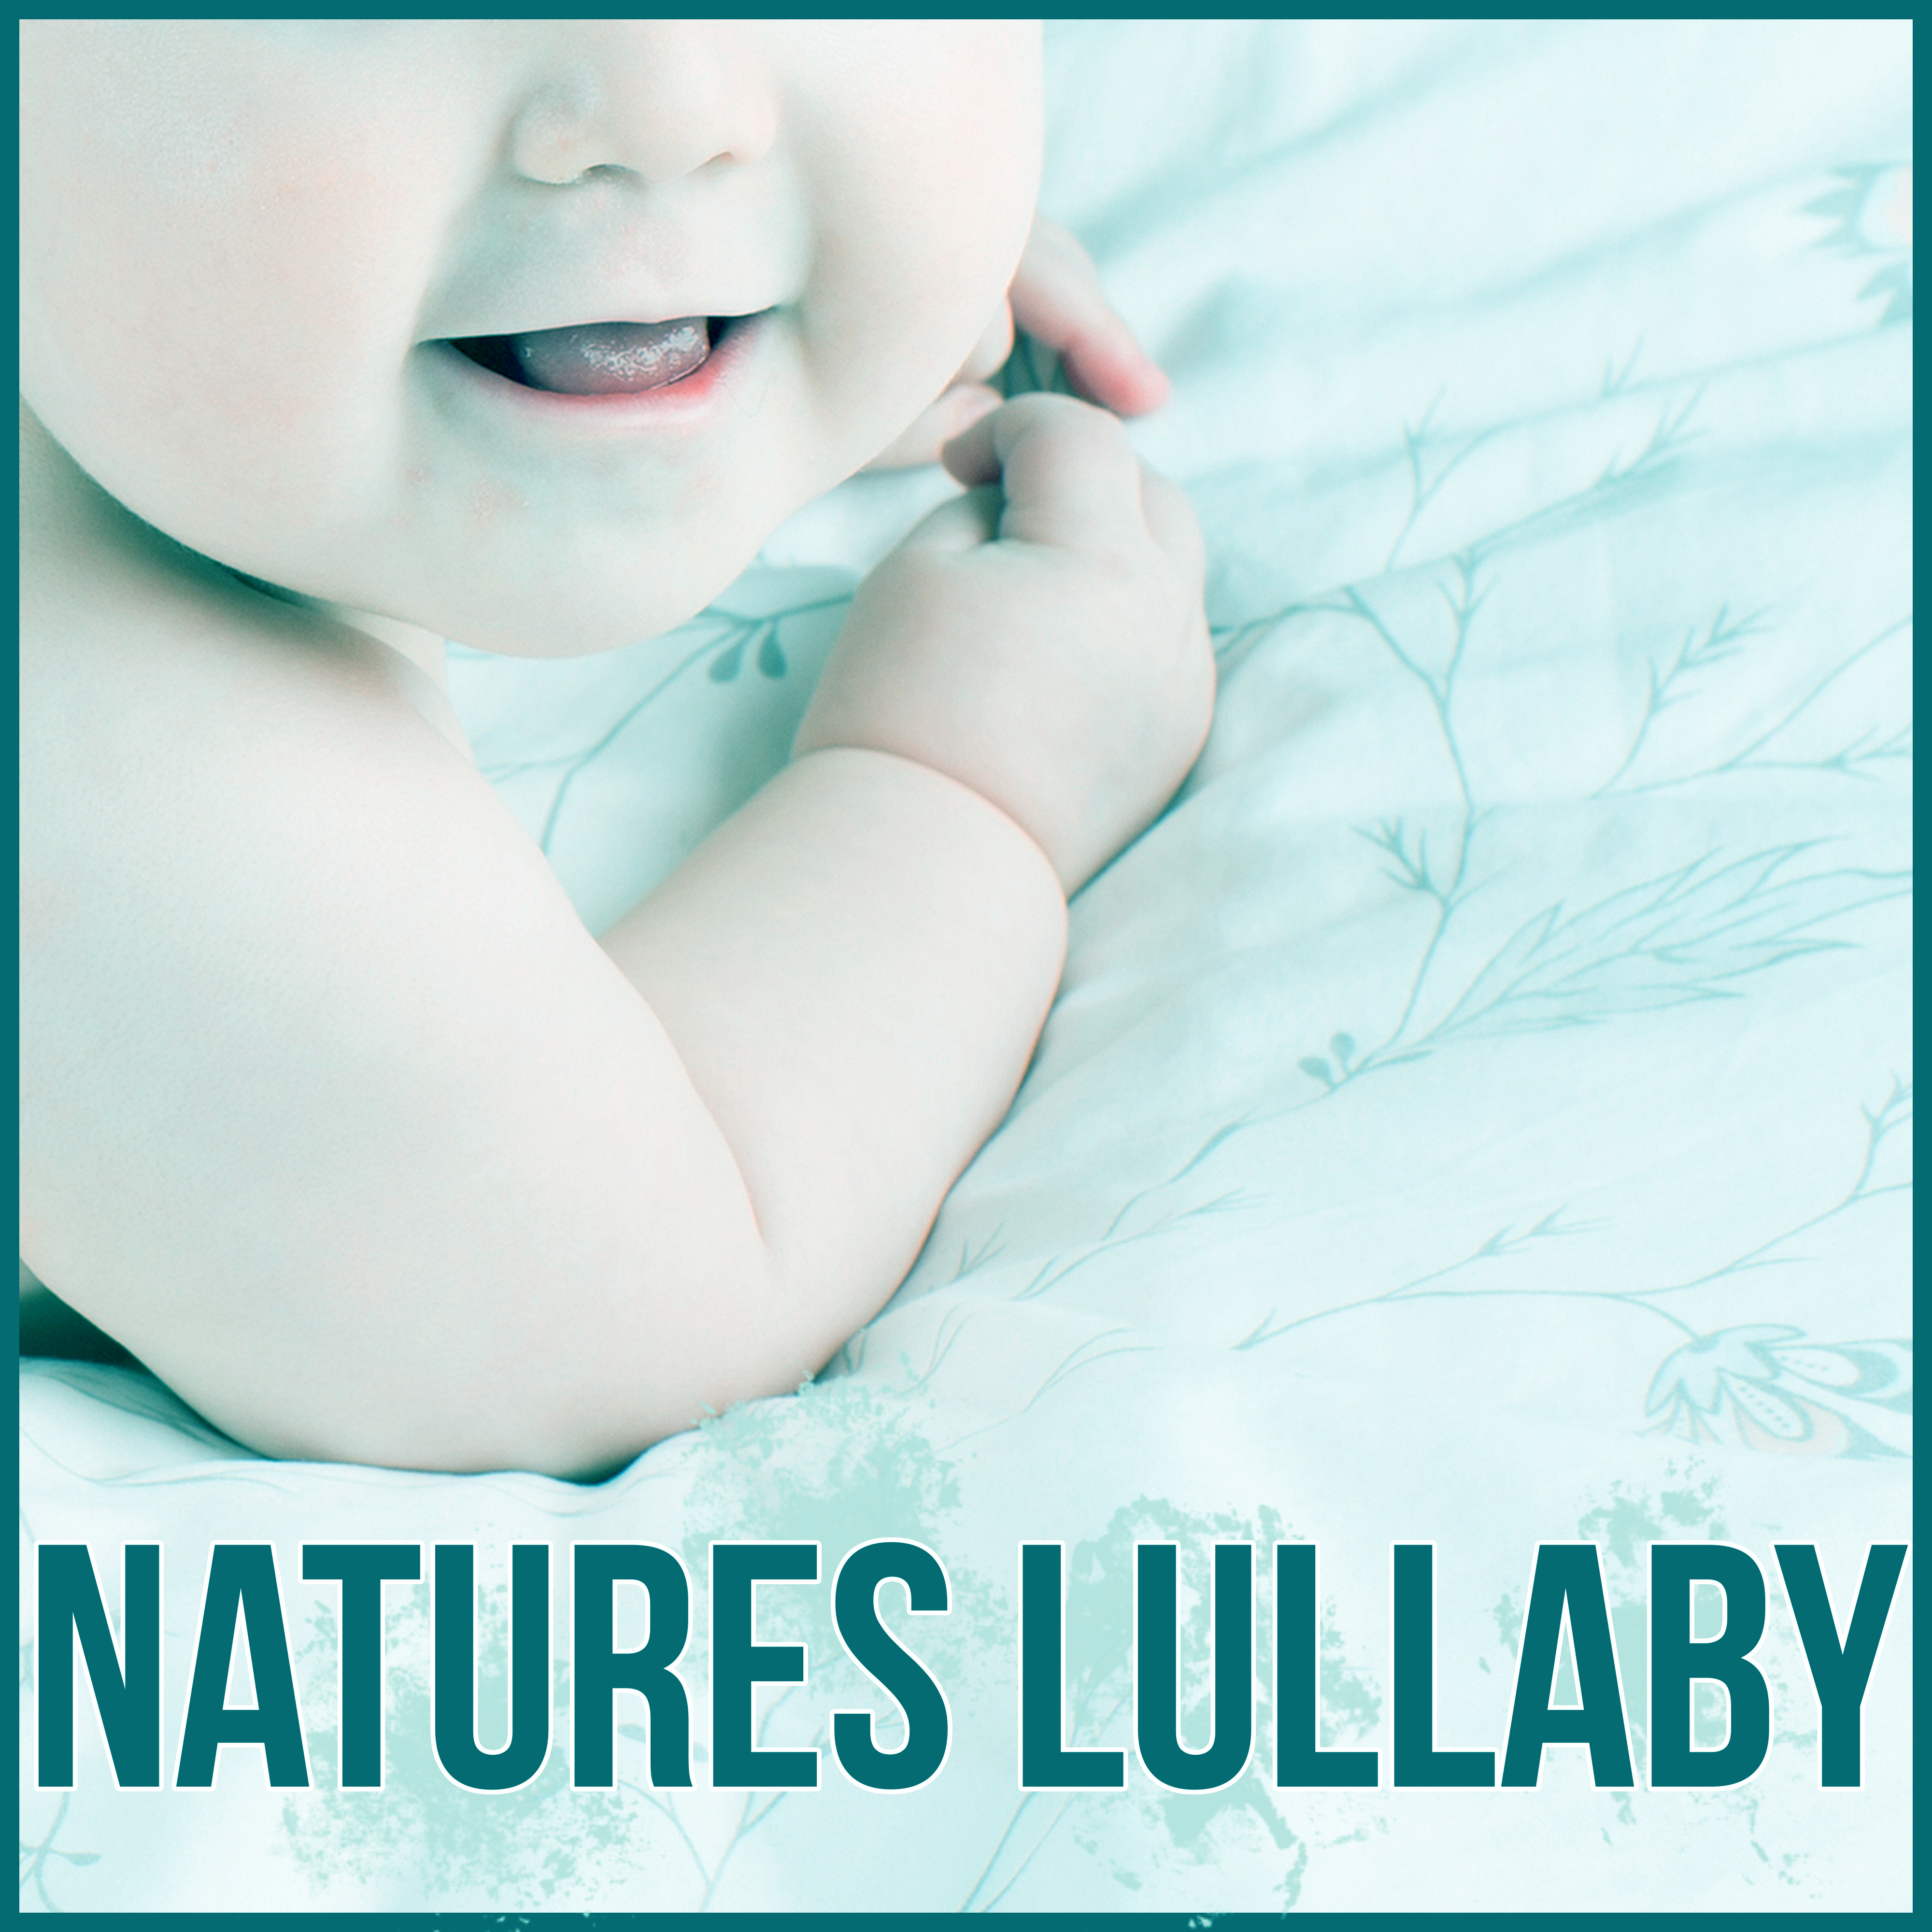 Natures Lullaby - Anti Stress Music to Sleep Through the Night, White Noise for Deep Sleep, Nature Sounds for Baby Sleep